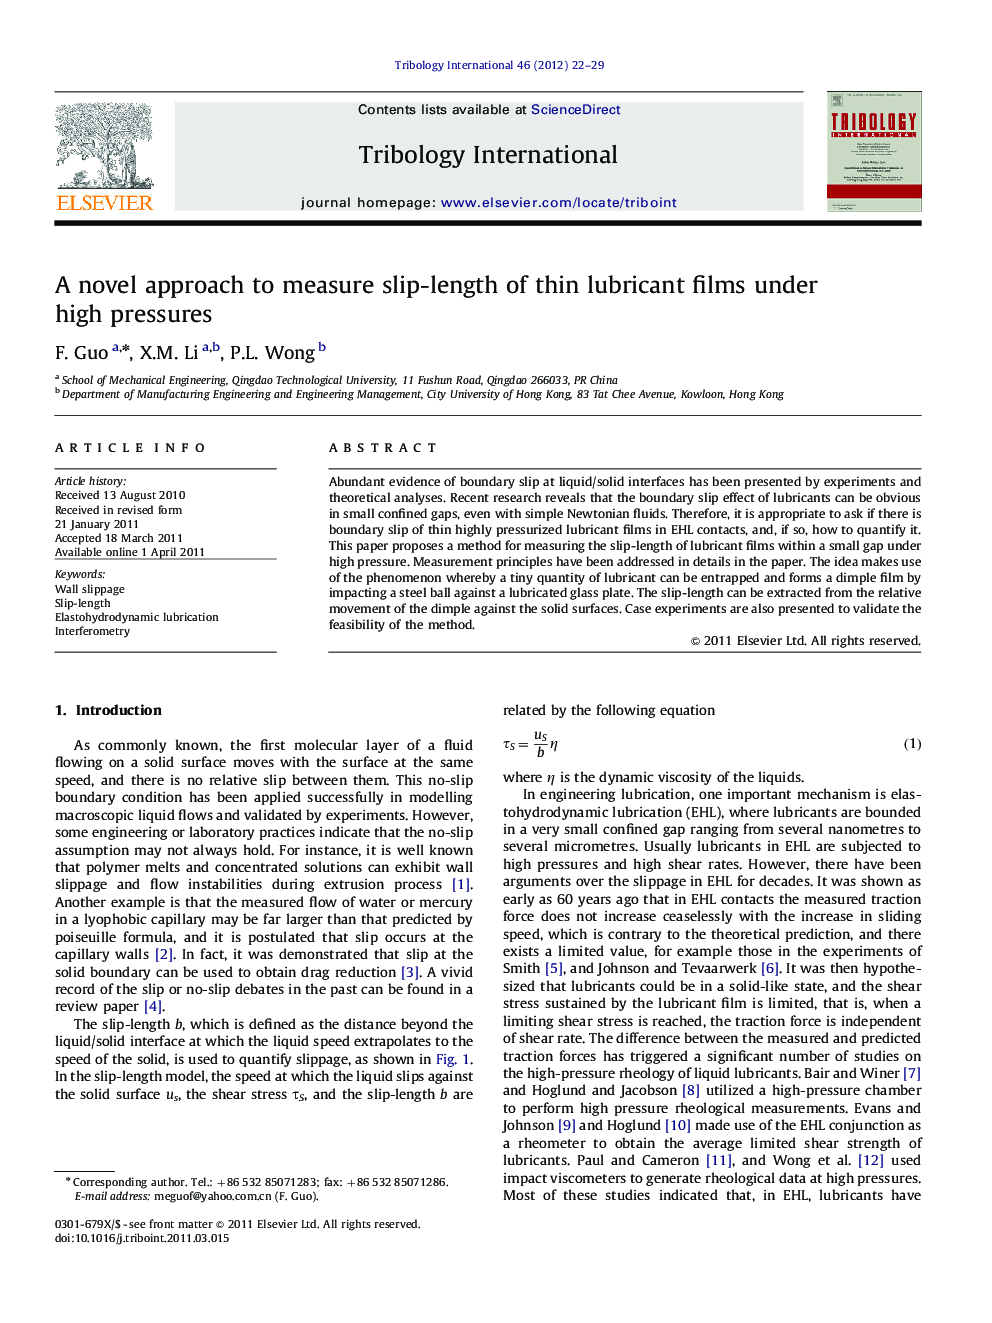 A novel approach to measure slip-length of thin lubricant films under high pressures